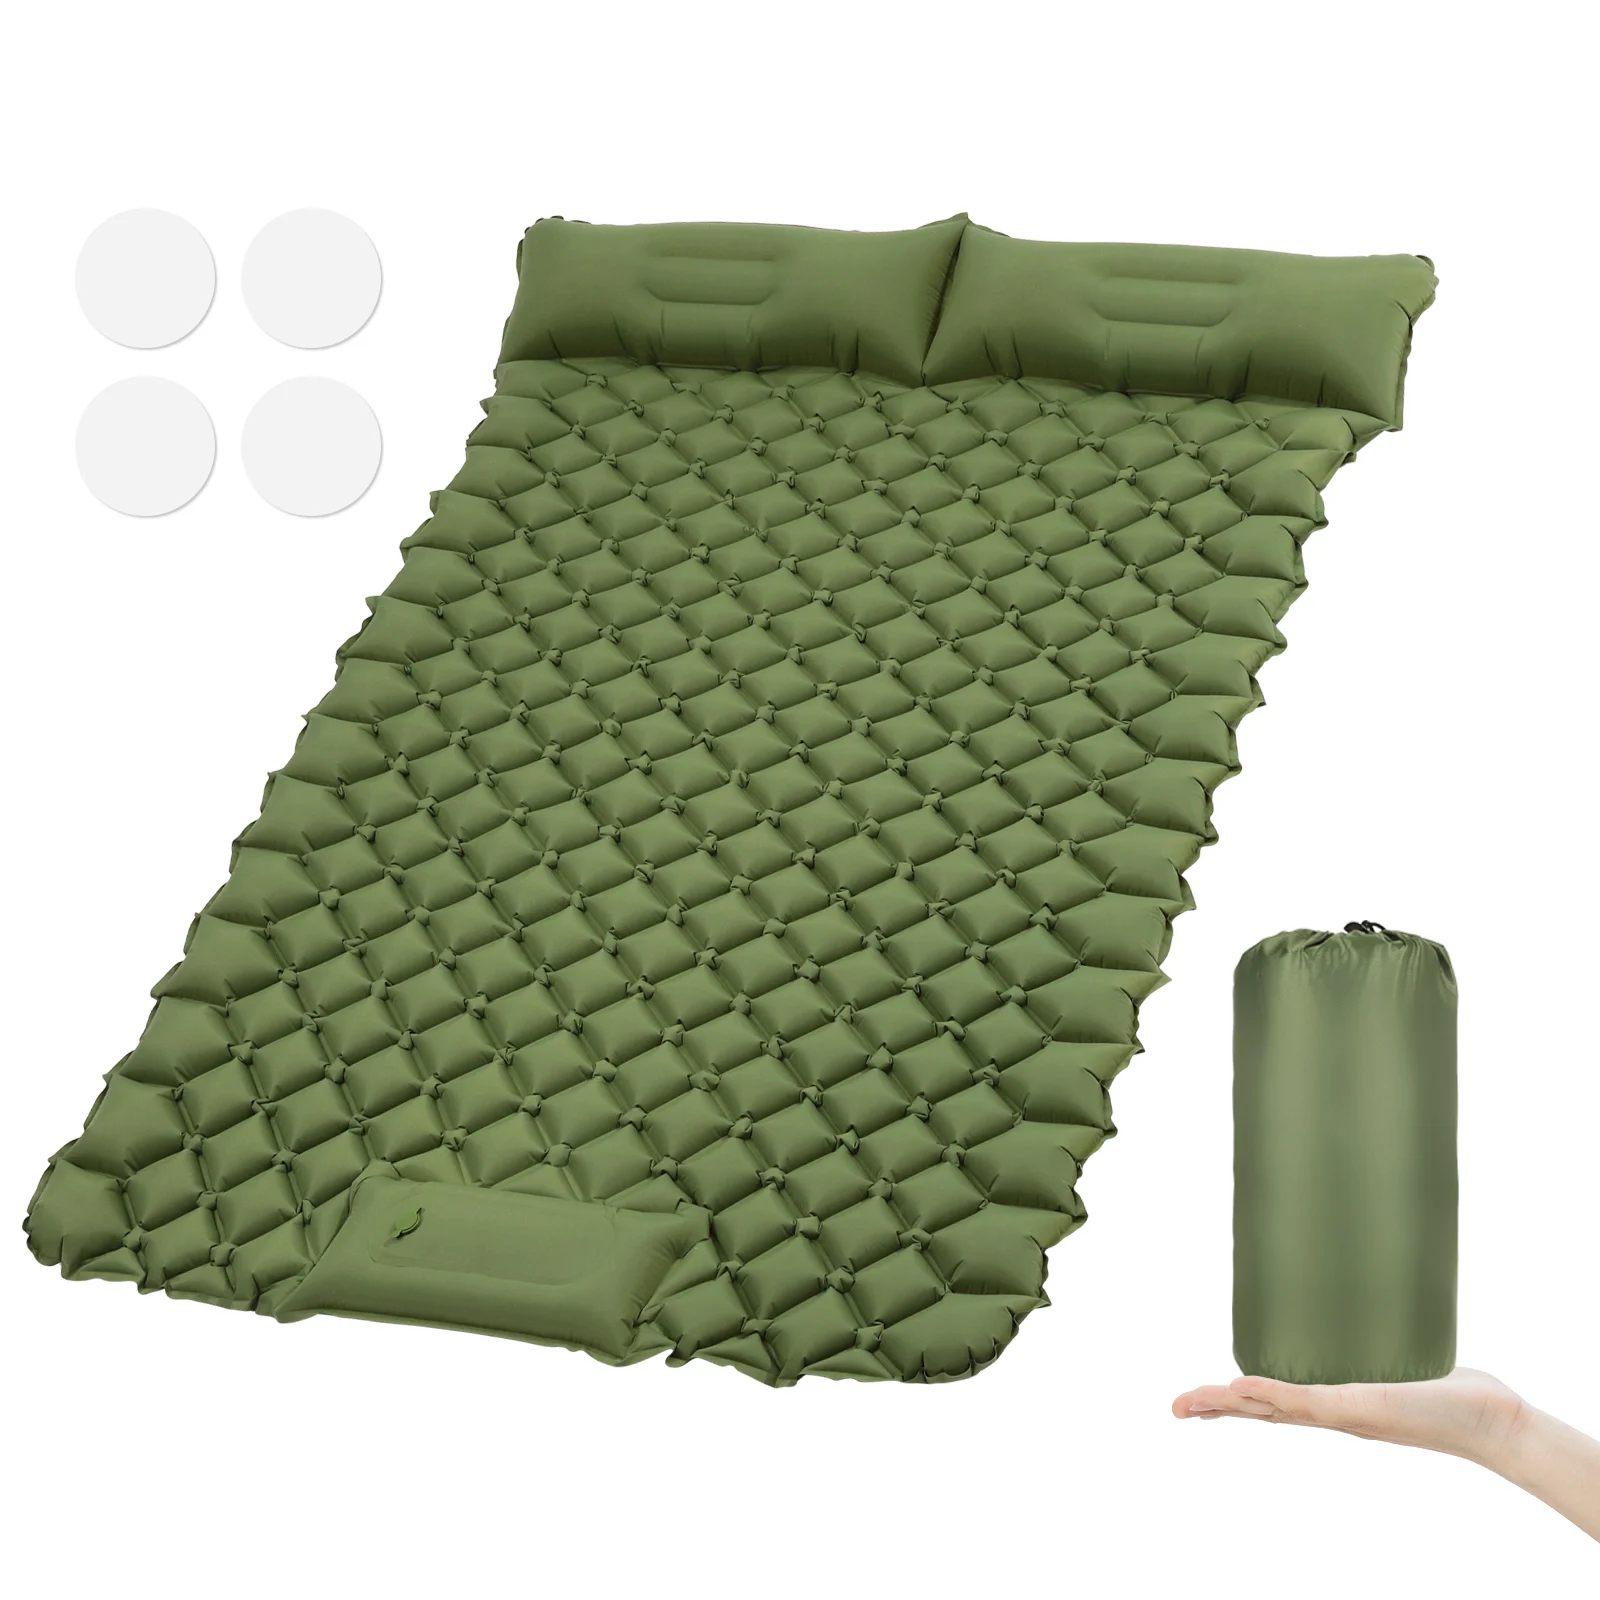 outdoor camping green cozy double with pillow inflatable mattress widening tent sleeping pad suitable for wild camping trips